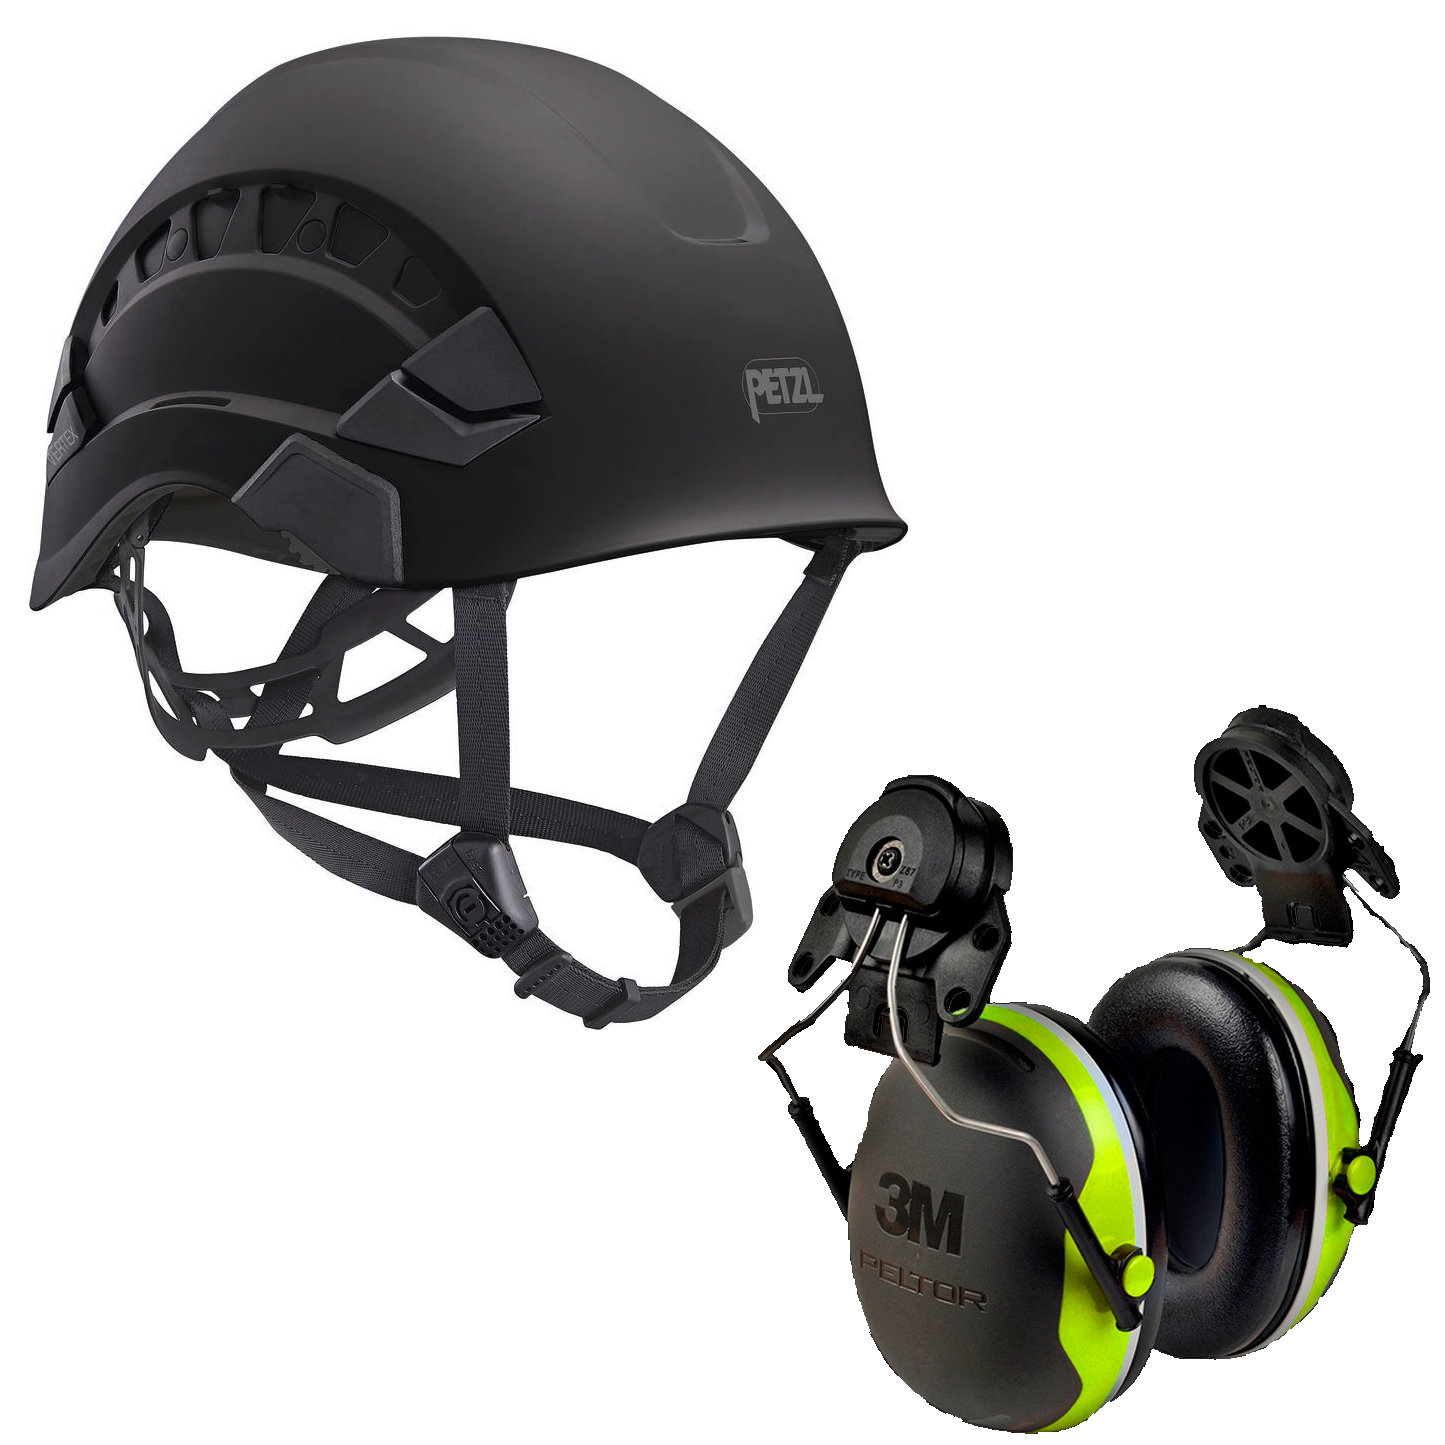 Purchase Petzl Vertex Vent Helmet Black (A010CA03)  3M Earmuffs X4P3G/E  online today. Best PPE and safety products in Australia.